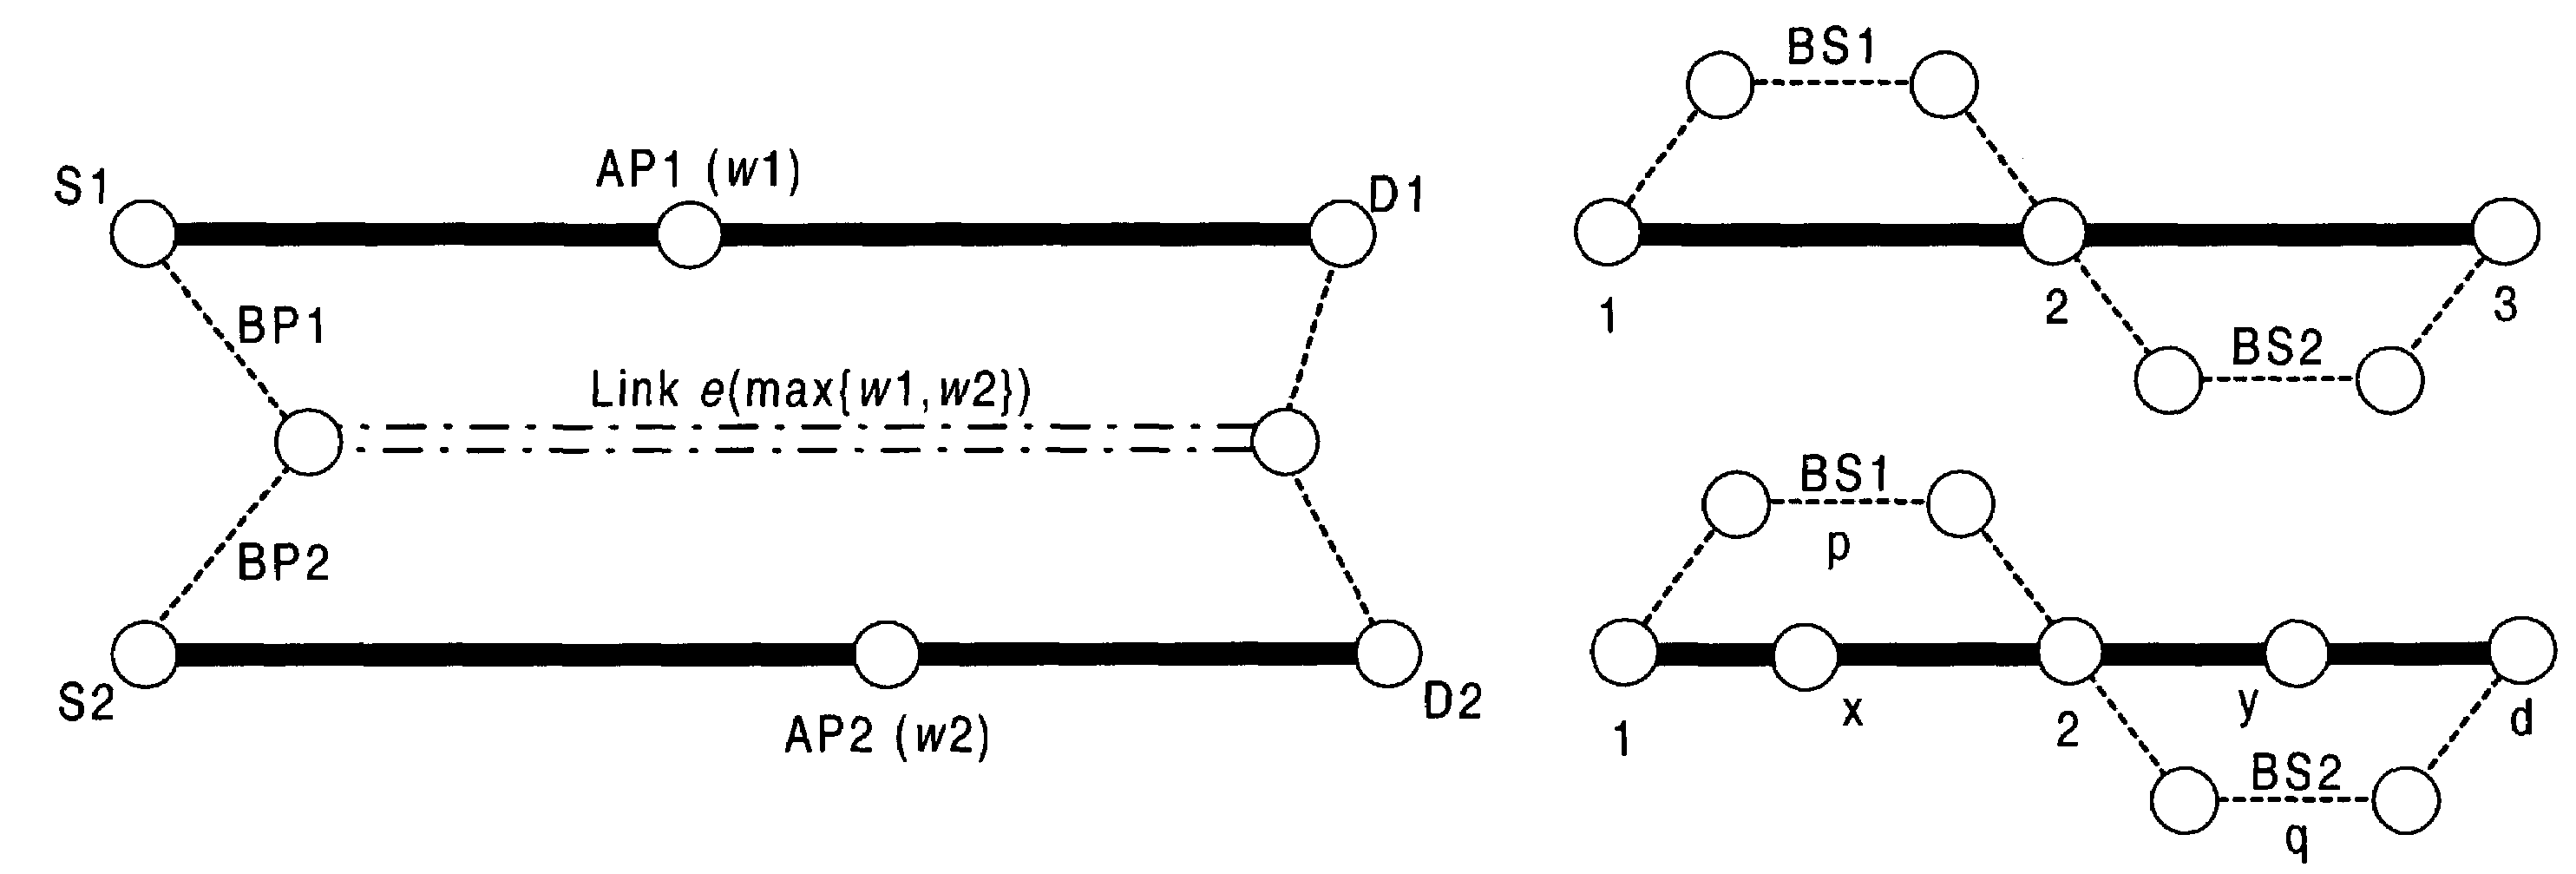 Segment protection scheme for a network